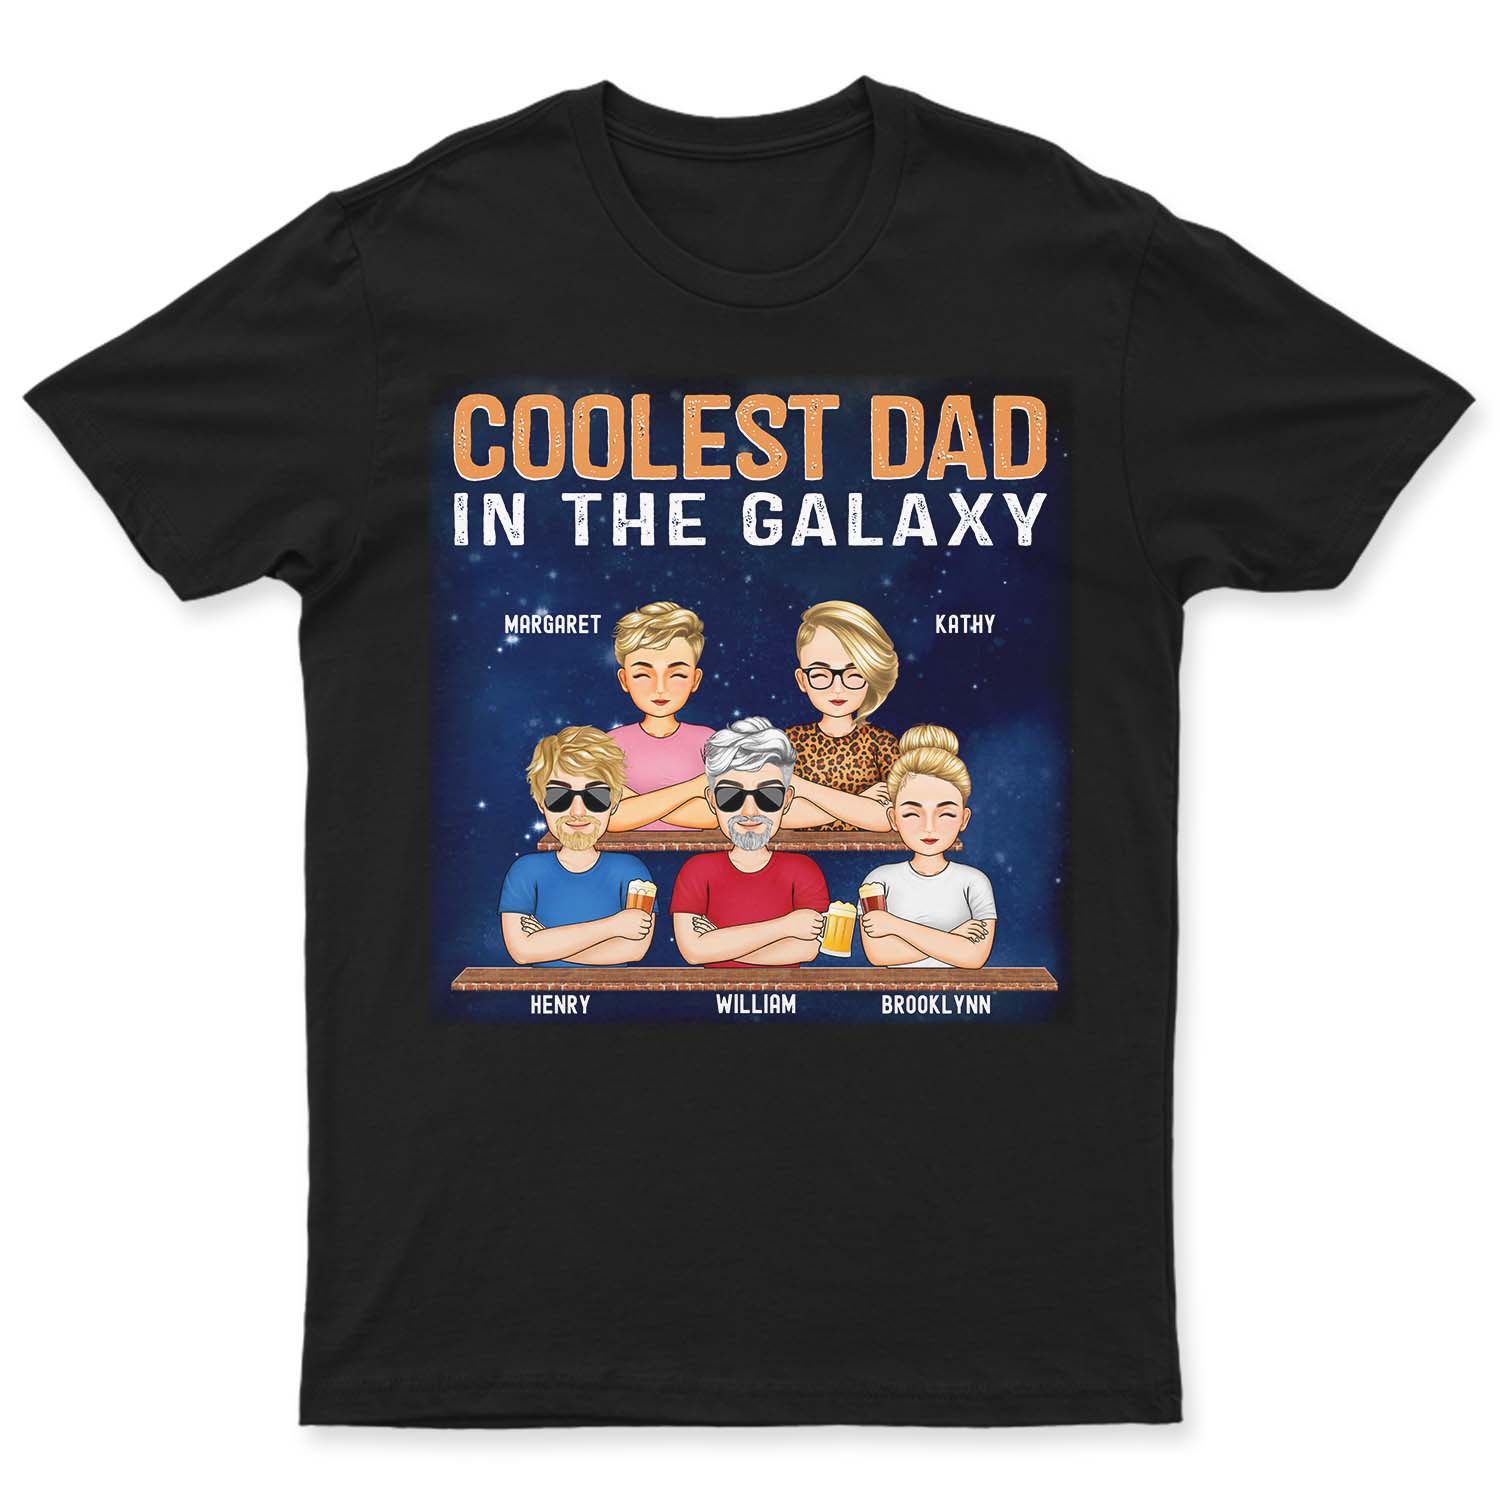 Coolest Dad In The Galaxy - Birthday, Loving Gift For Daddy, Father, Grandpa, Grandfather - Personalized Custom T Shirt